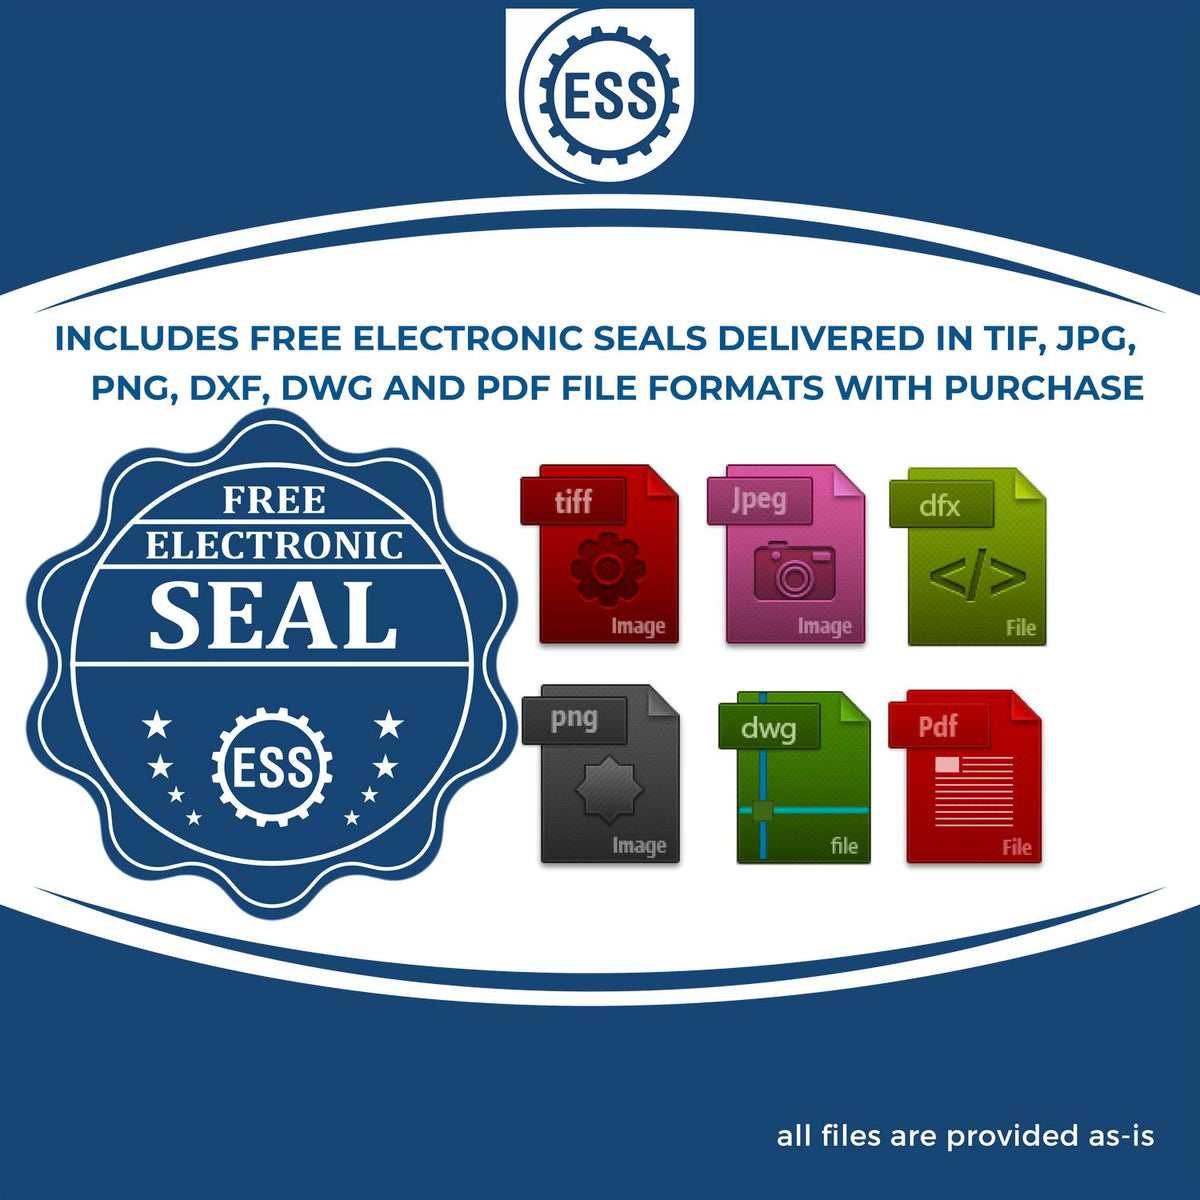 An infographic for the free electronic seal for the Soft Alabama Professional Engineer Seal illustrating the different file type icons such as DXF, DWG, TIF, JPG and PNG.